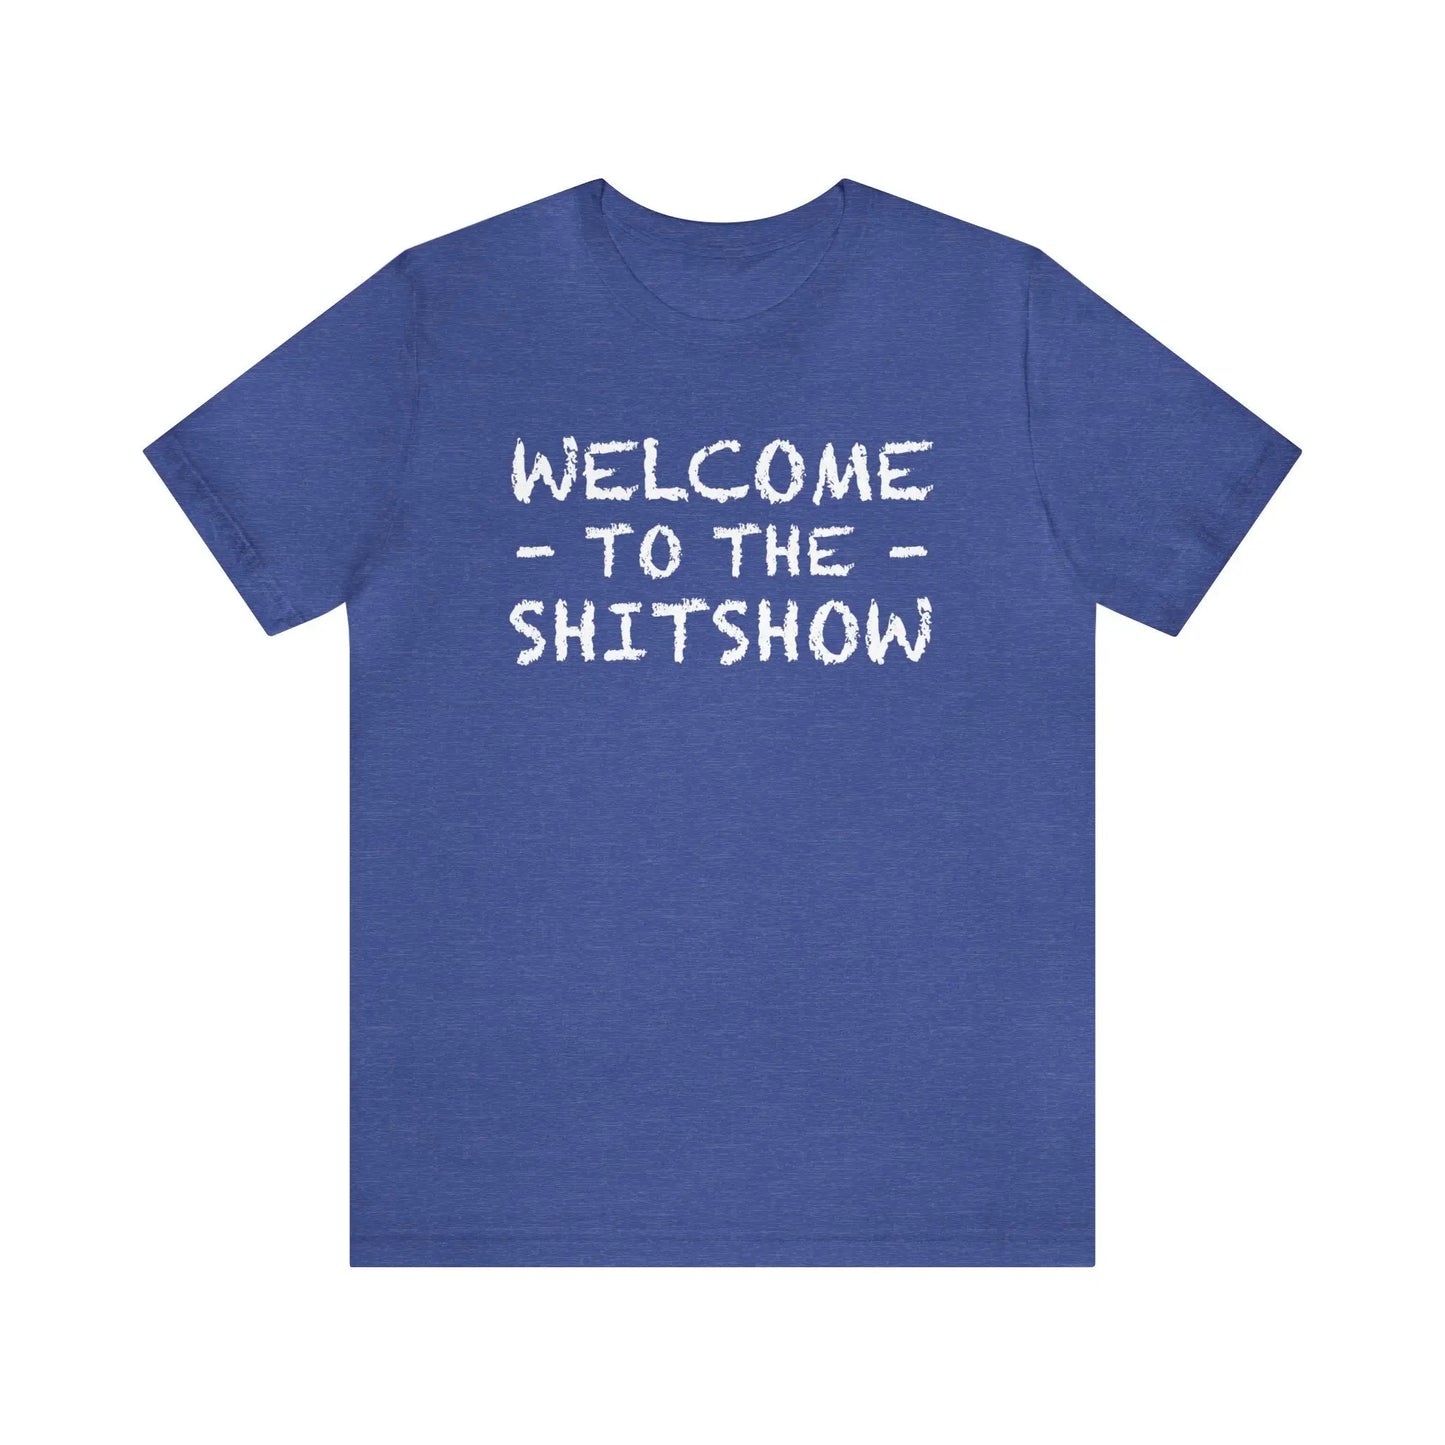 Welcome To The Shitshow Men's Short Sleeve Tee - Wicked Tees